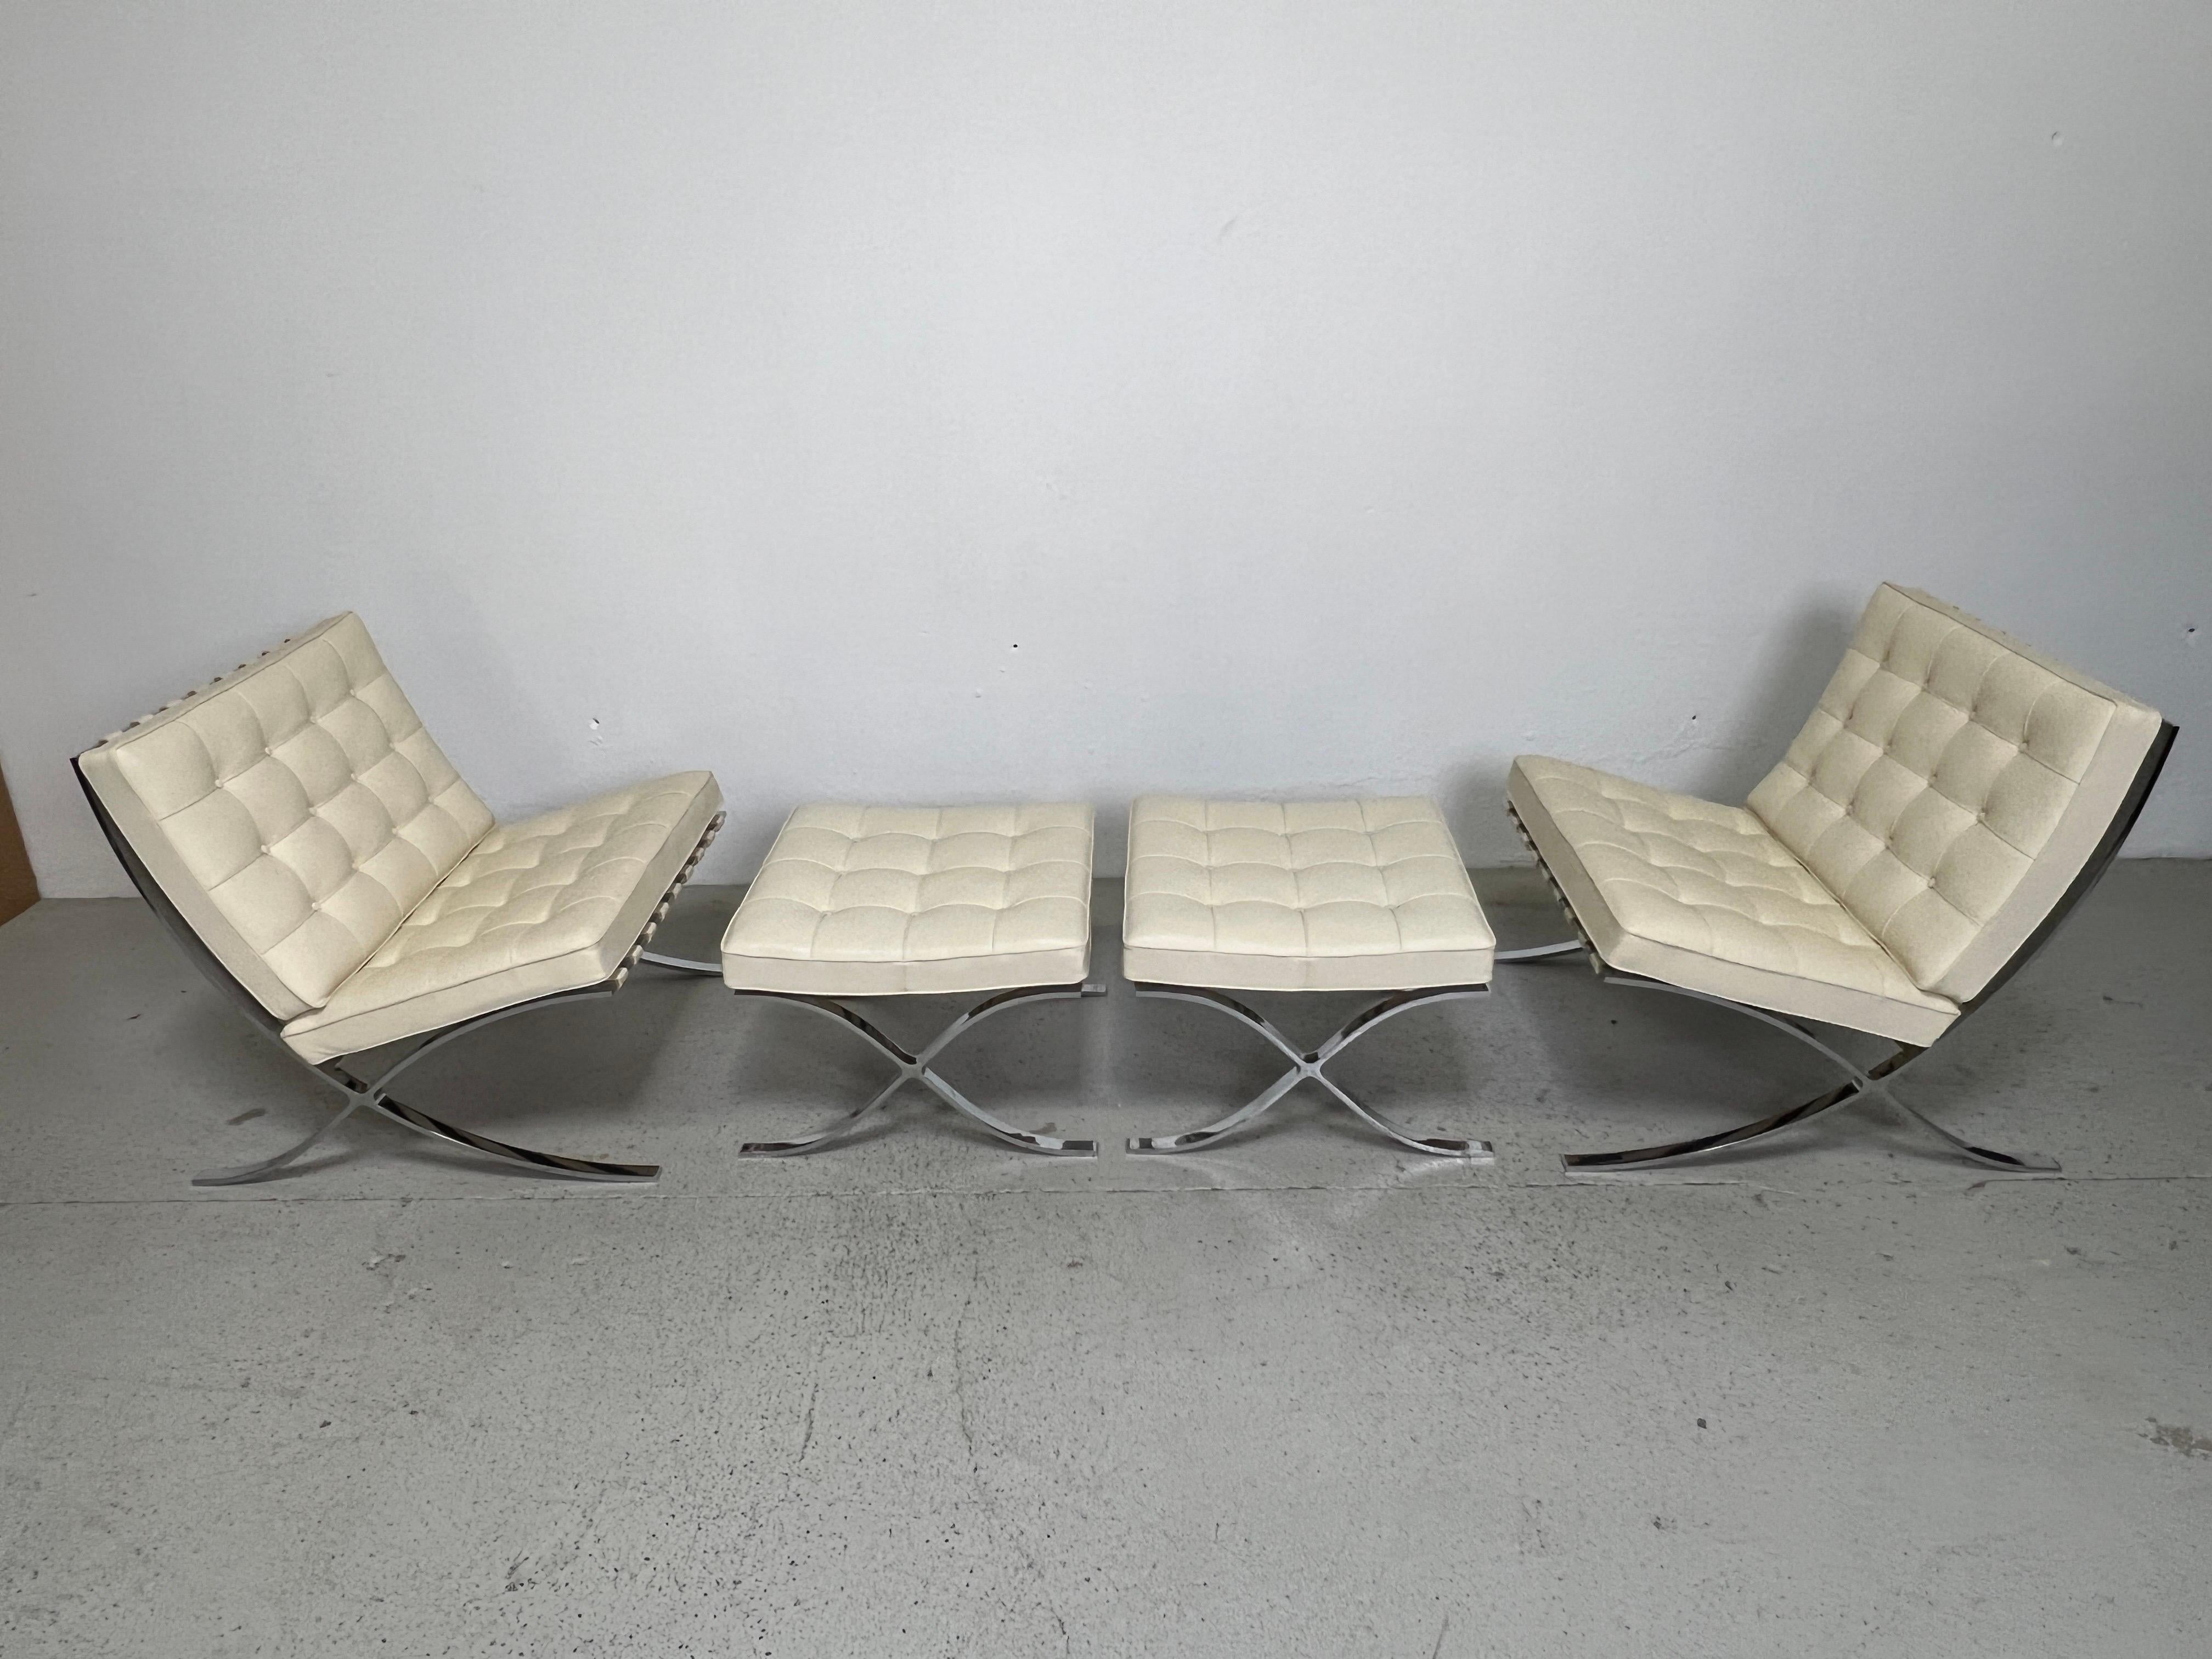 A matching pair of Barcelona chairs and ottomans designed by Mies van der Rohe for Knoll. This set from the 2000s with a buttery soft cream colored leather. 